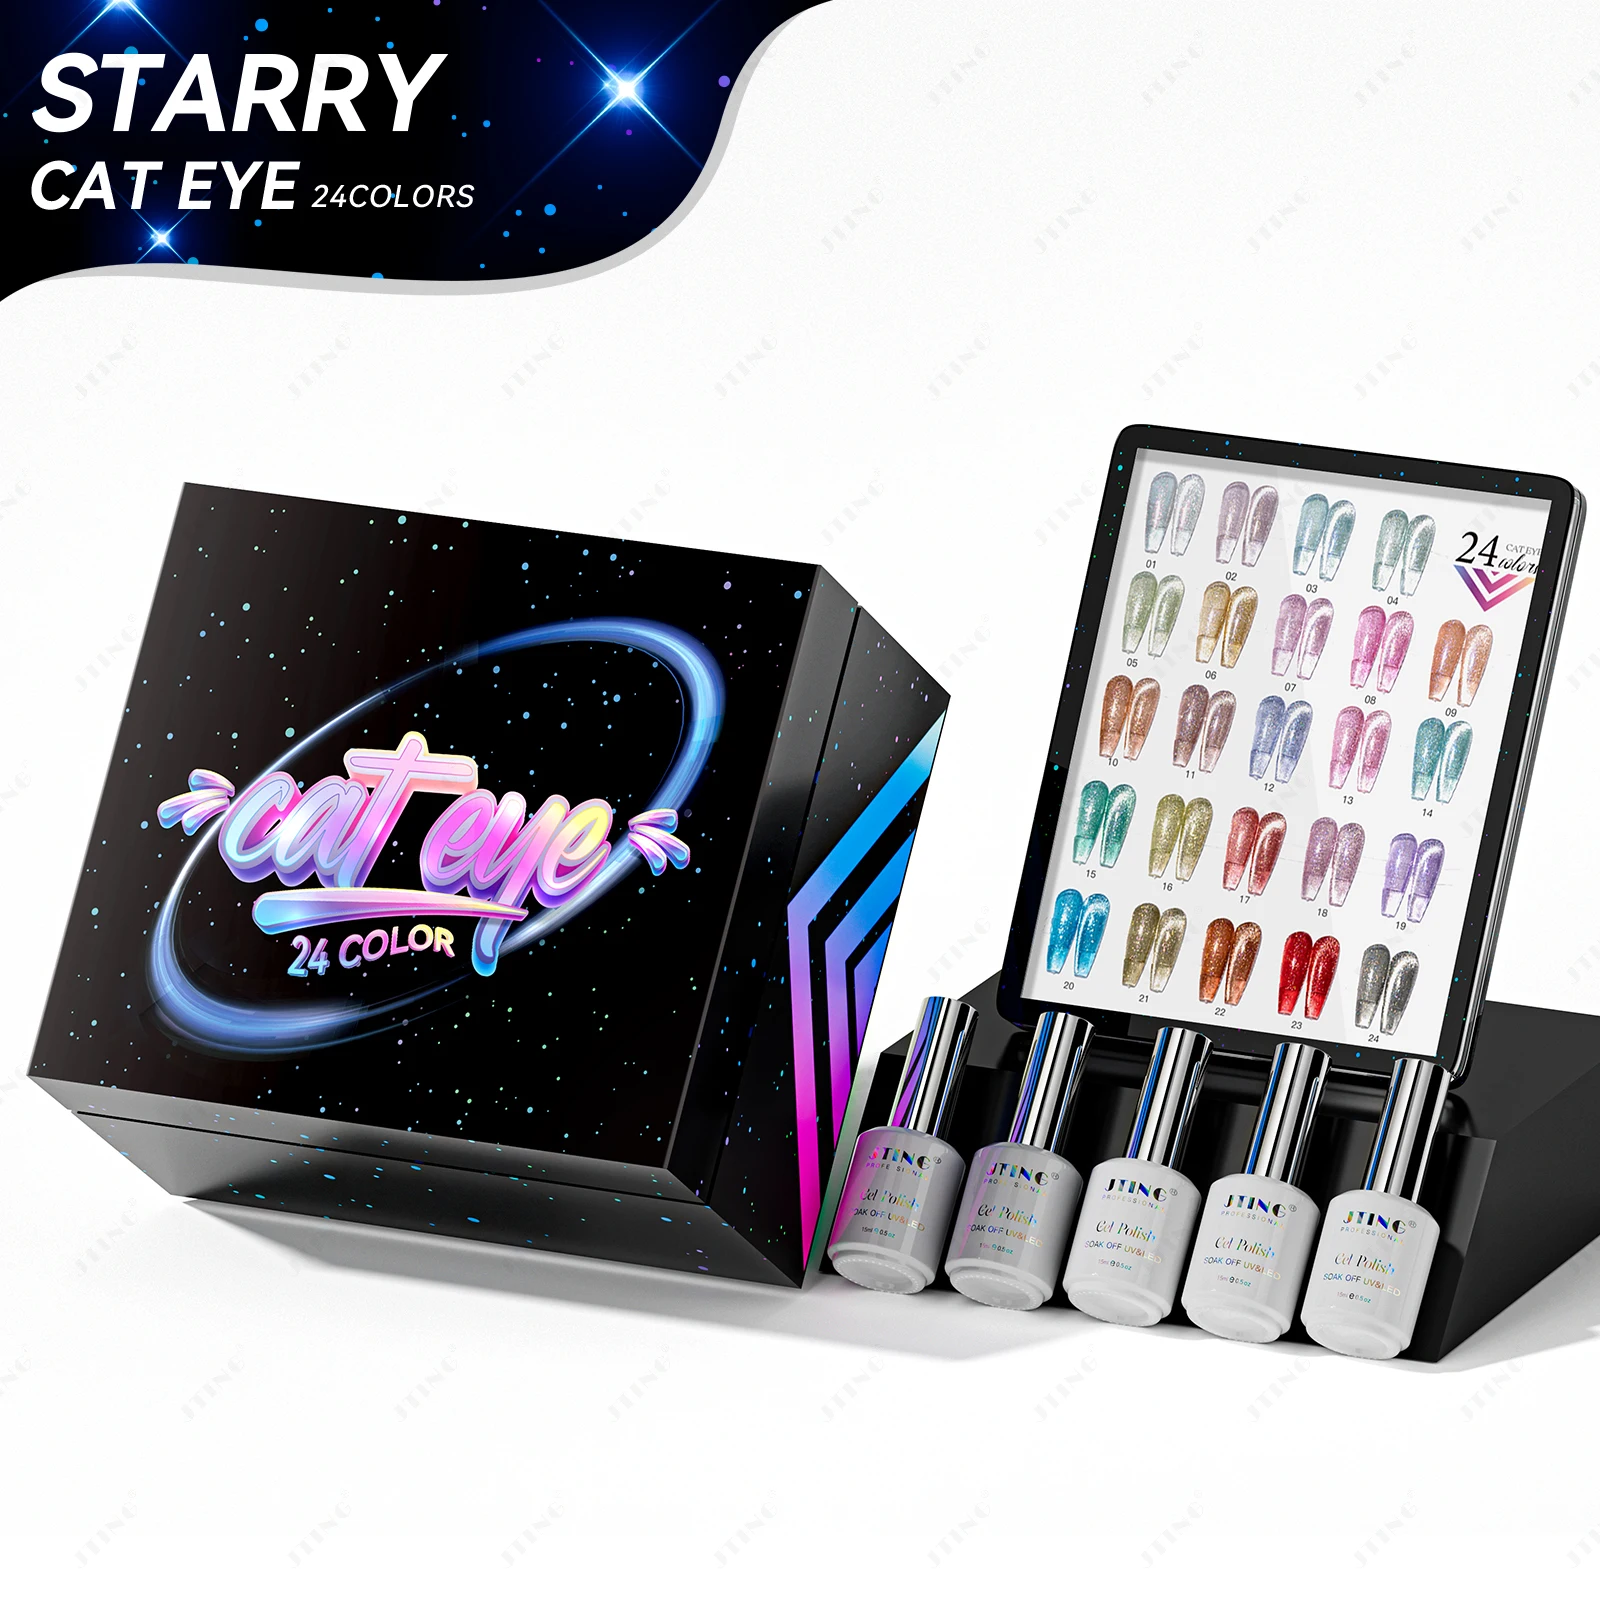 

JTING Newest Unique Starry cat eye gel collection set box 24colors summer diamond cat eye gel nail polish with unique color book